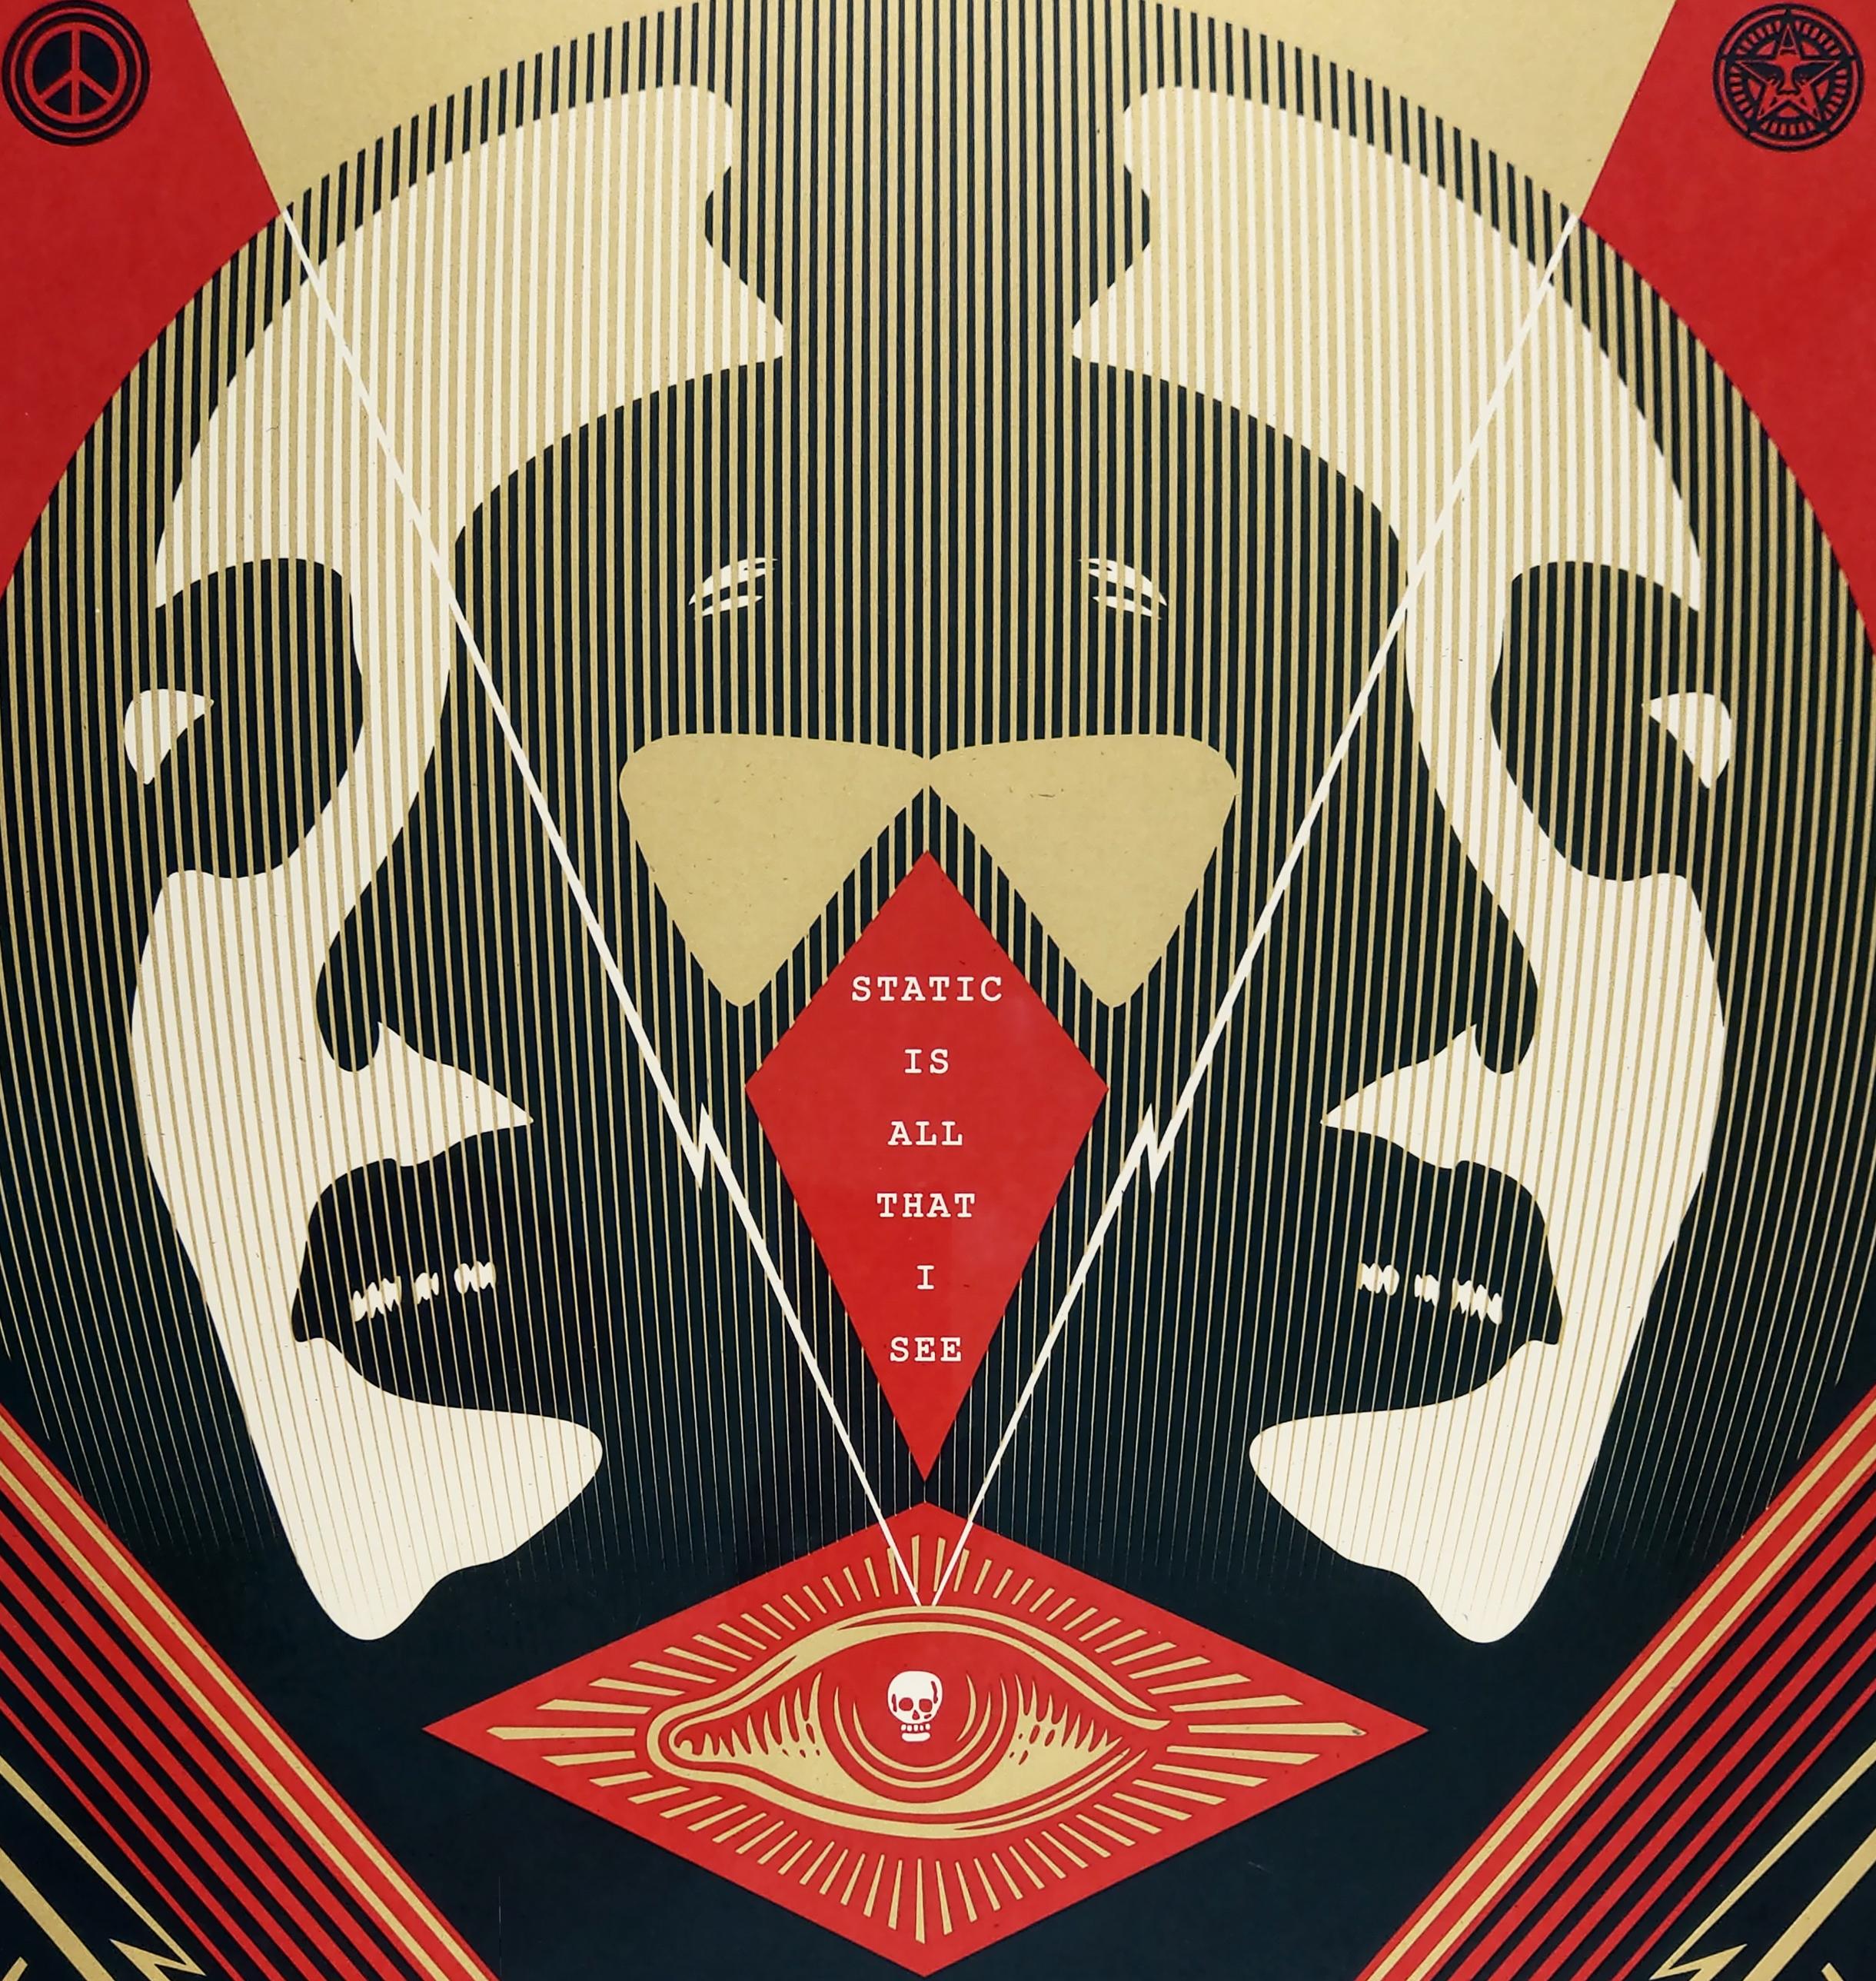 obey giant posters